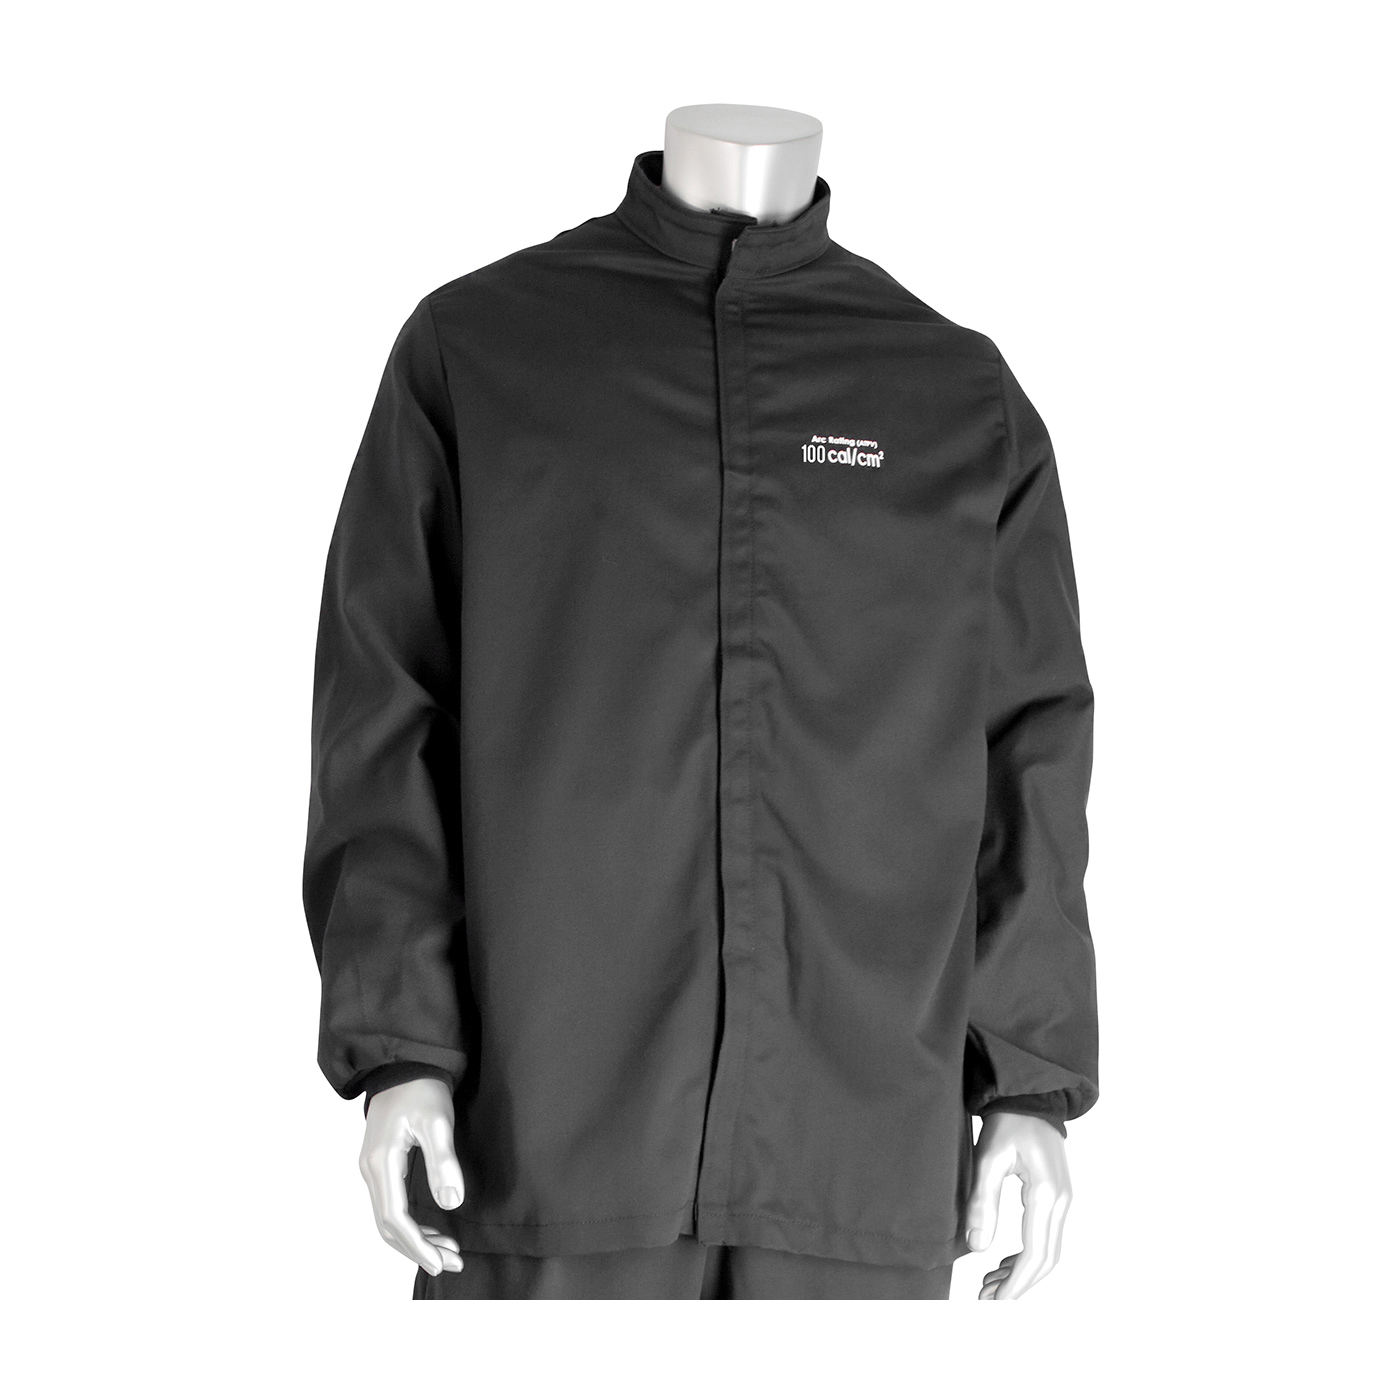 PIP® 9100-52750/2XL Arc and Flame Resistant Jacket, 2XL, Gray, Aramid/Cotton, 52 to 54 in Chest, Resists: Arc and Flame, ASTM F1506-10a, ASTM F2178-12